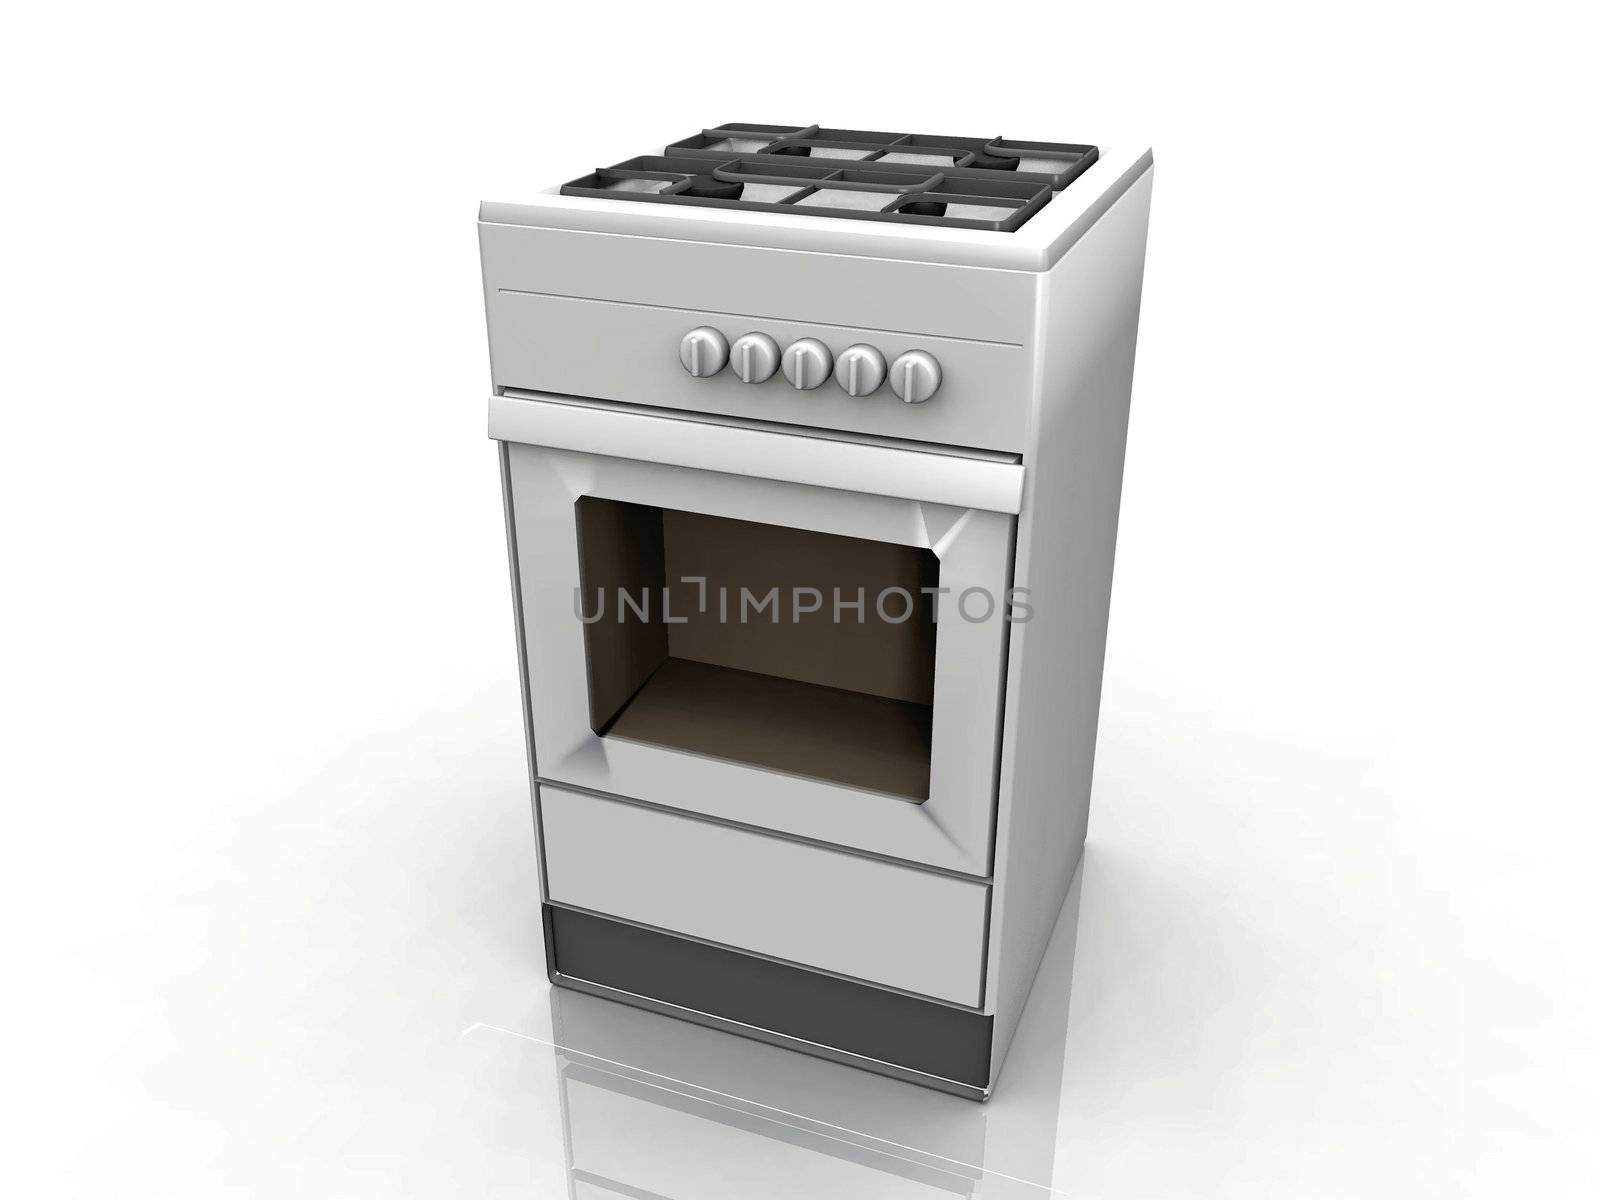 the stove on a white background by njaj